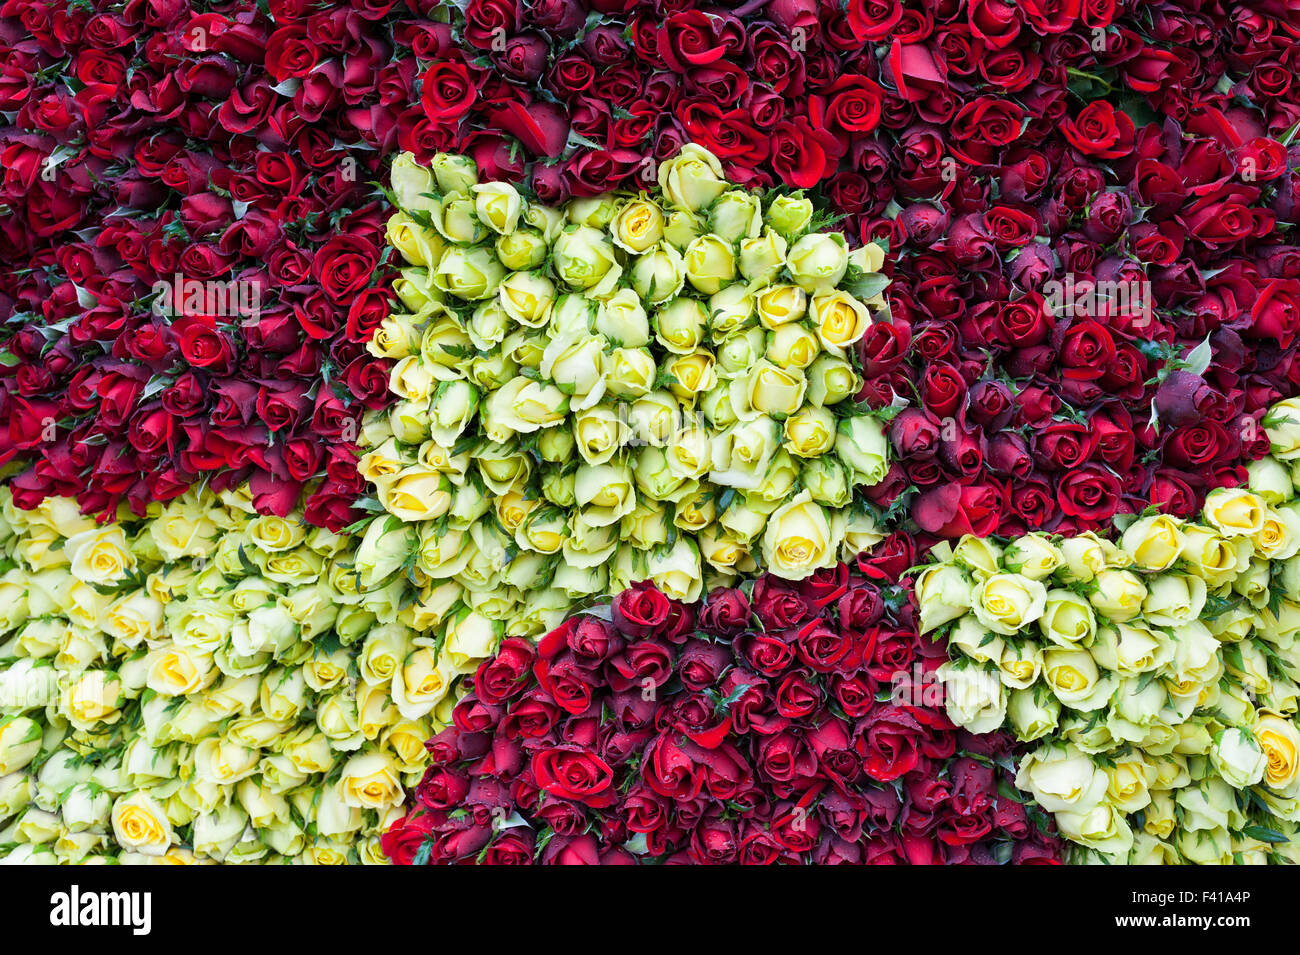 many red and yellow roses Stock Photo